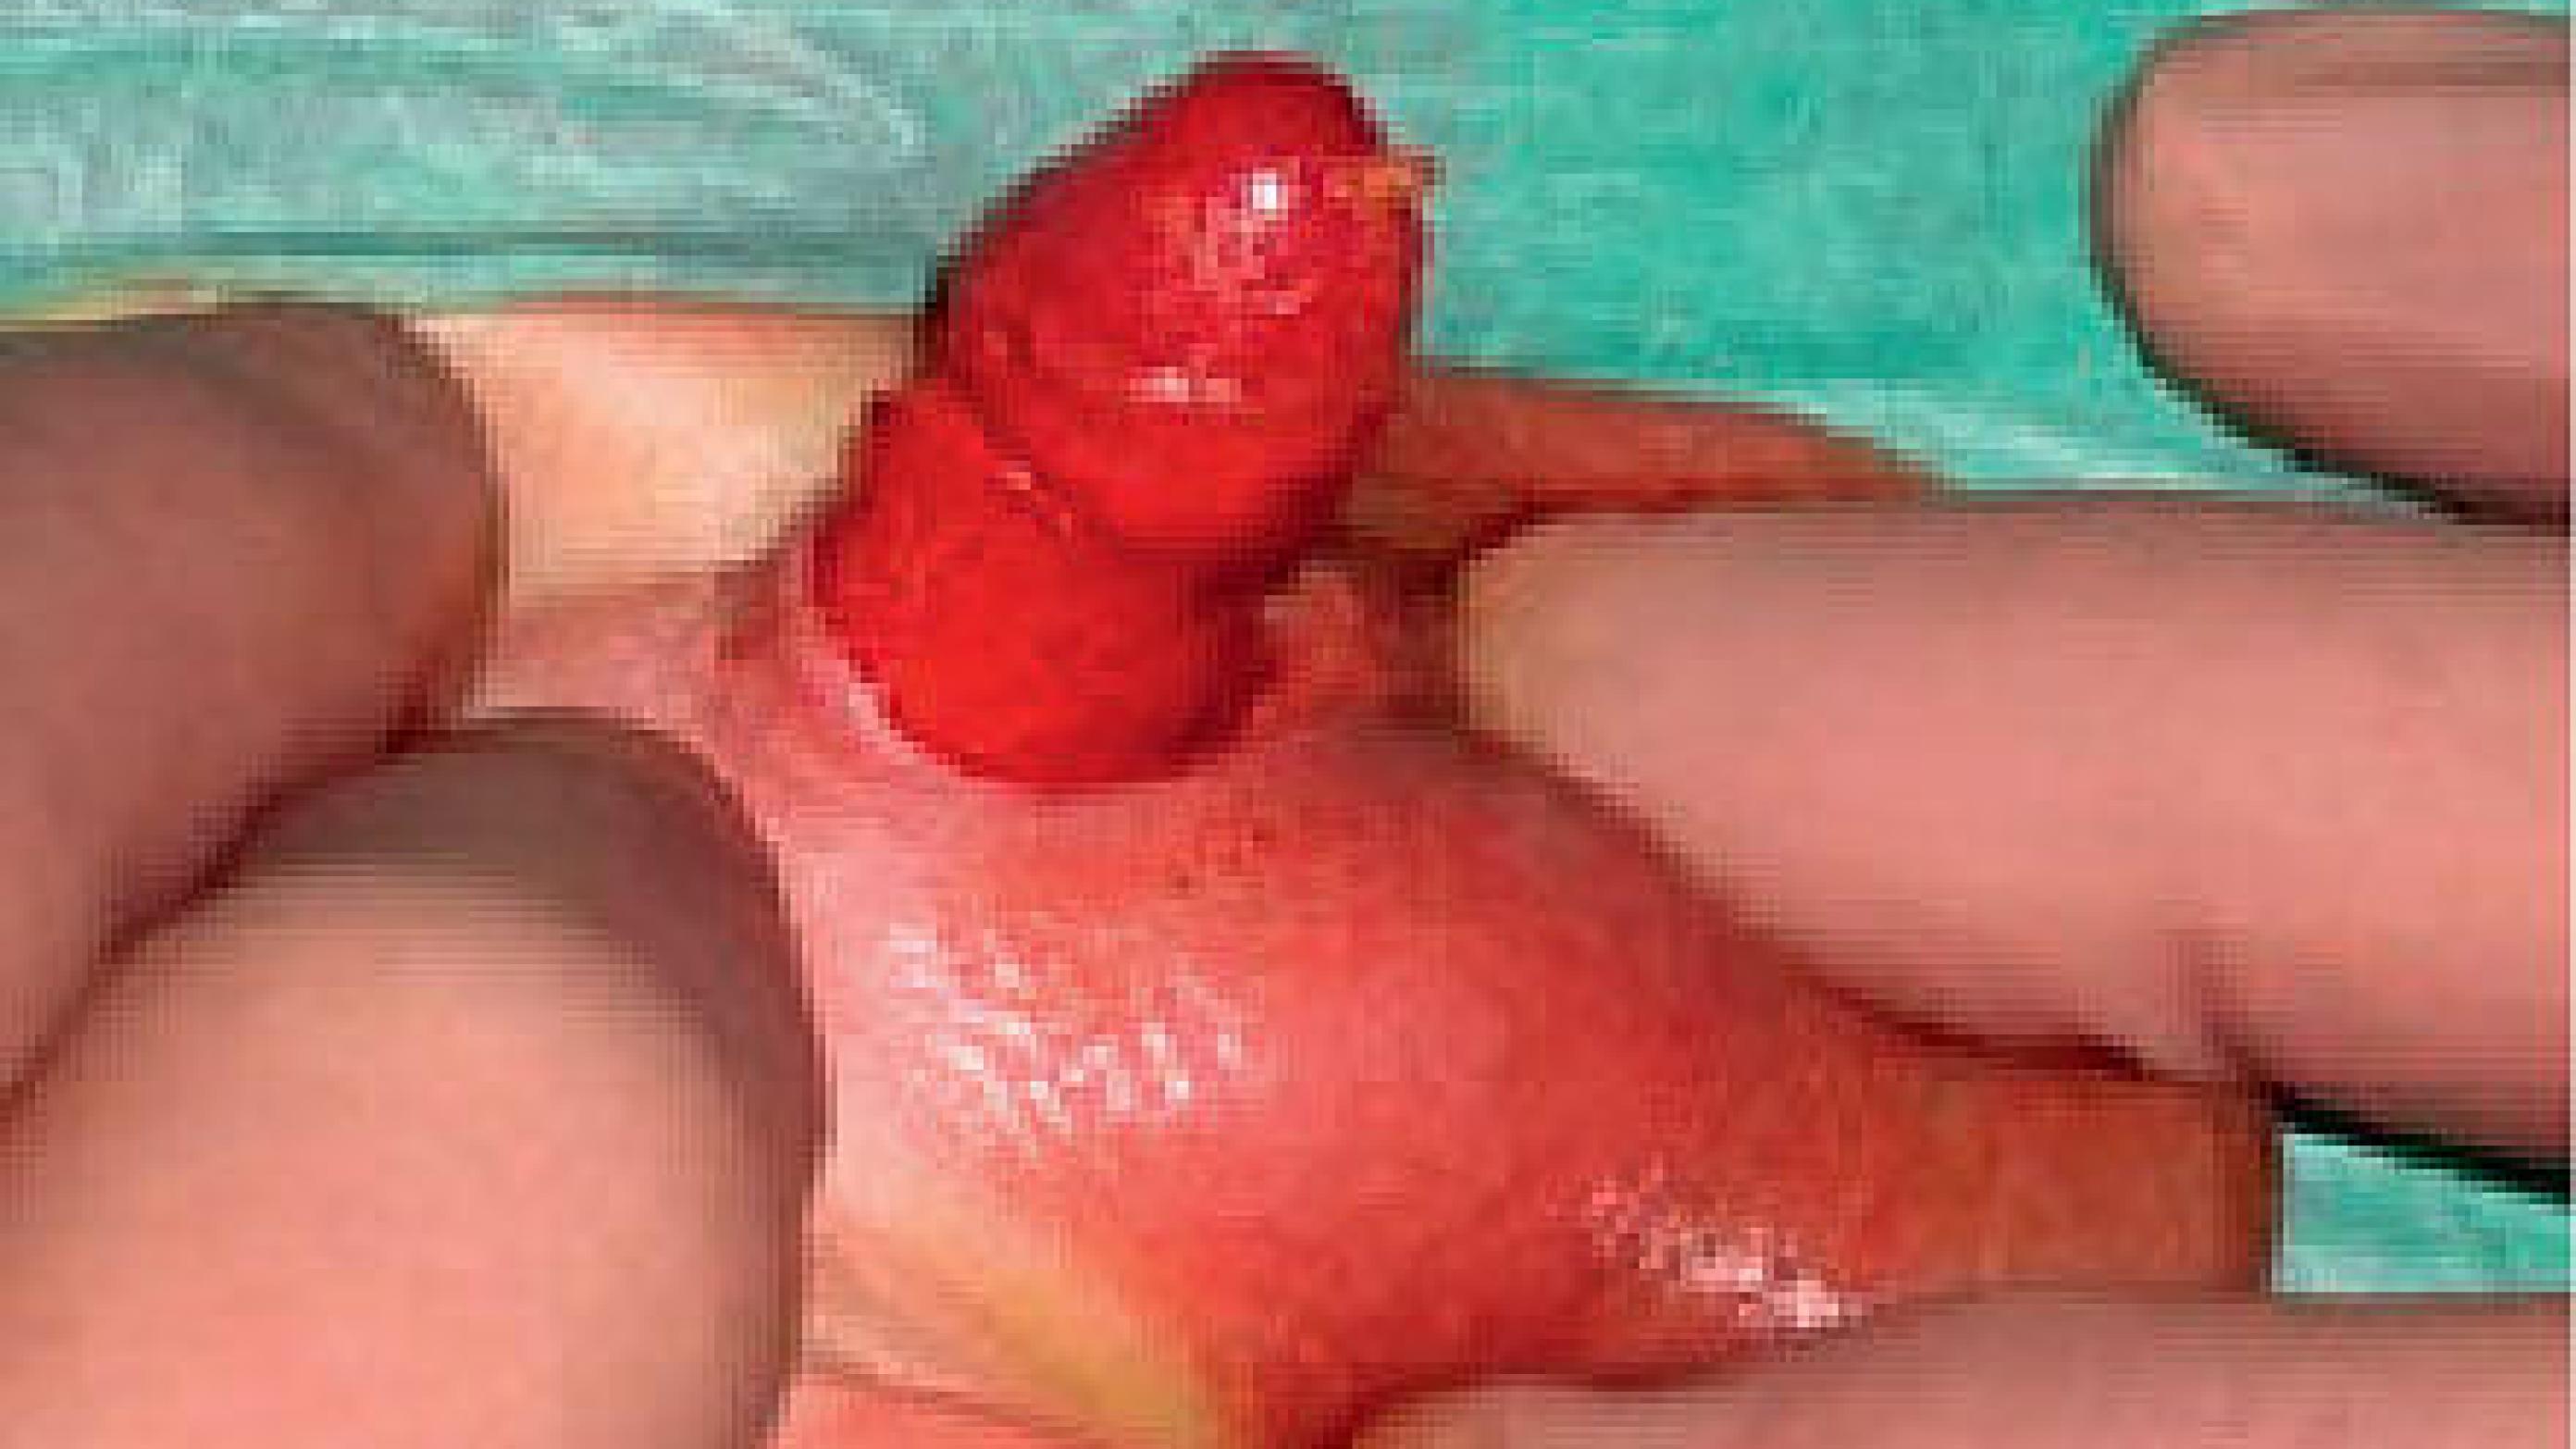 Complete excision of all penile skin as a complication to newborn male circumcision.